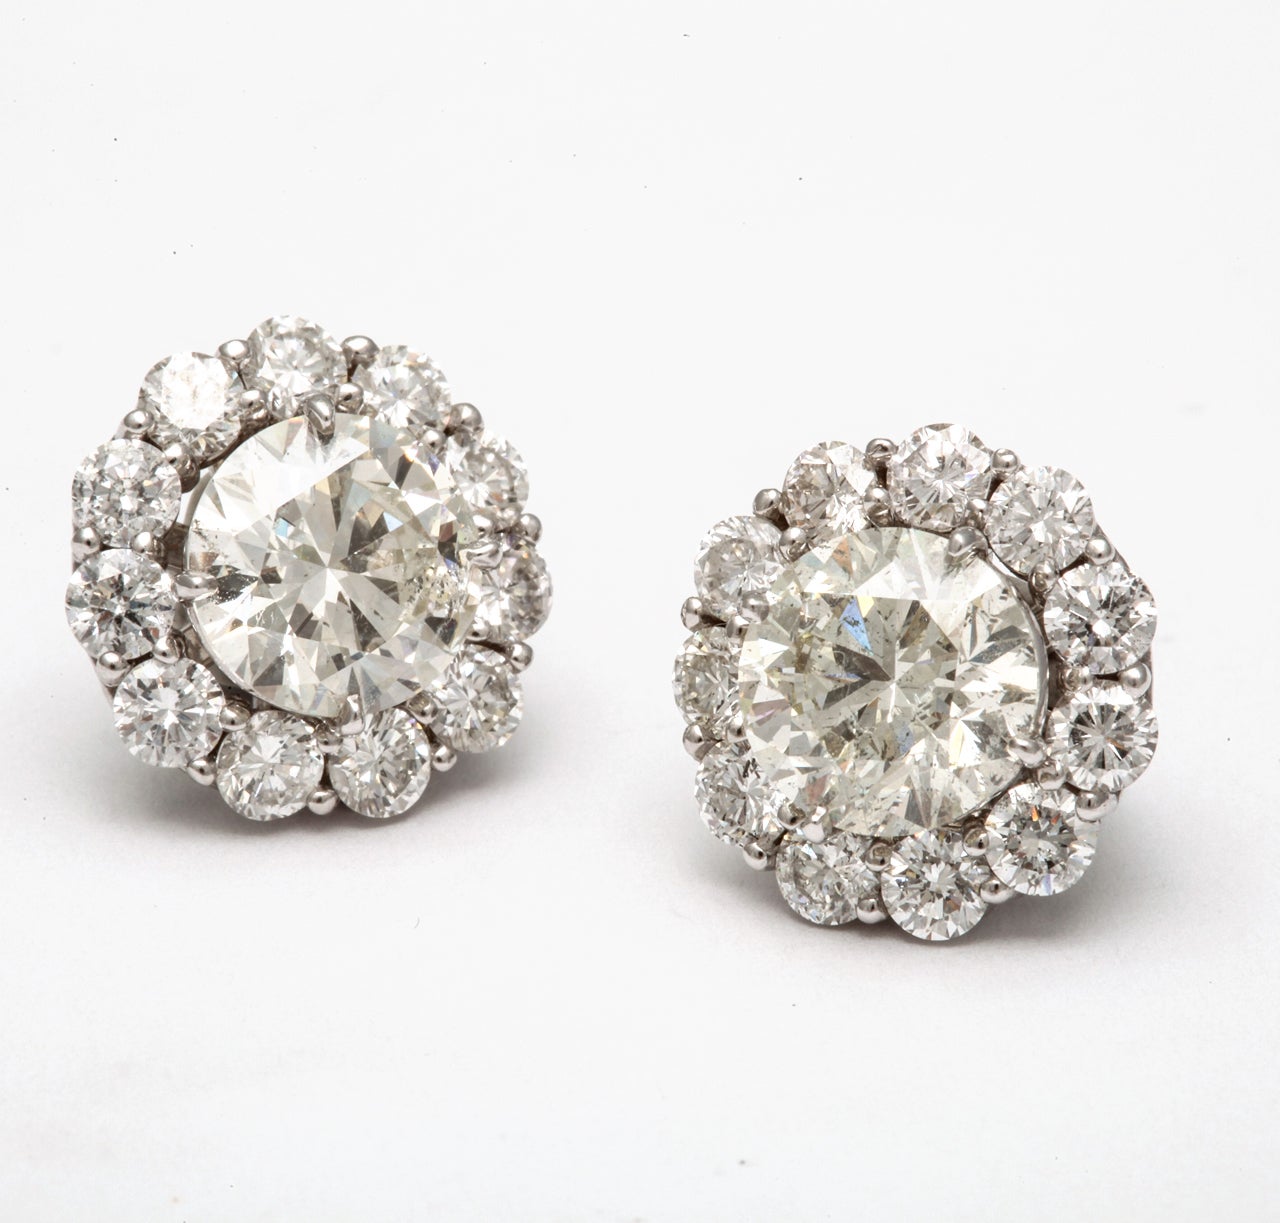 Give an extra sparkle to your studs...these diamond studs weigh 4.84 cts, Color: I, Clarity: SI1-SI2, flanked with removeable diamond jackets, weighing 2.20 carats. Average Stone 0.10 Carats

Available in every size and aveage stone. Please